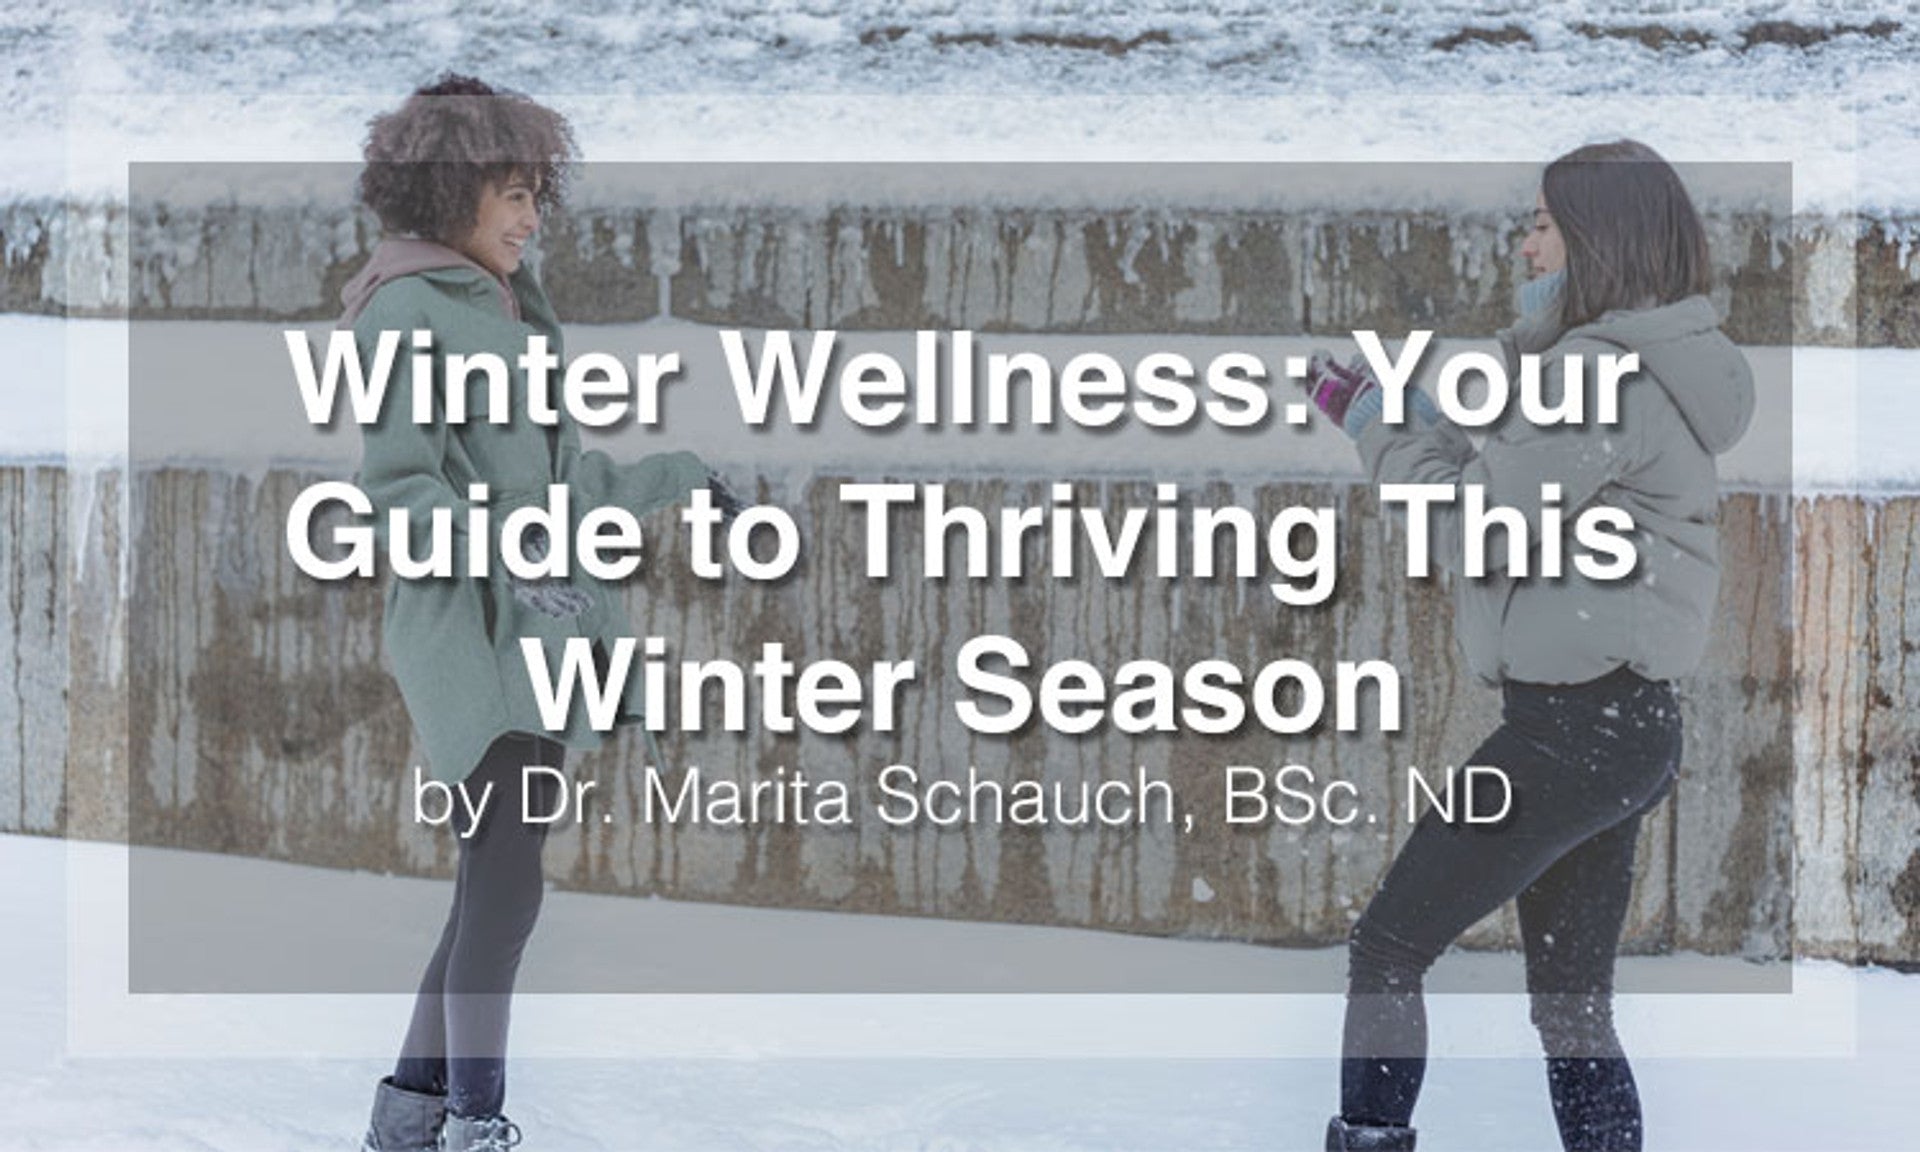 Winter Wellness: Your Guide to Thriving This Winter Season